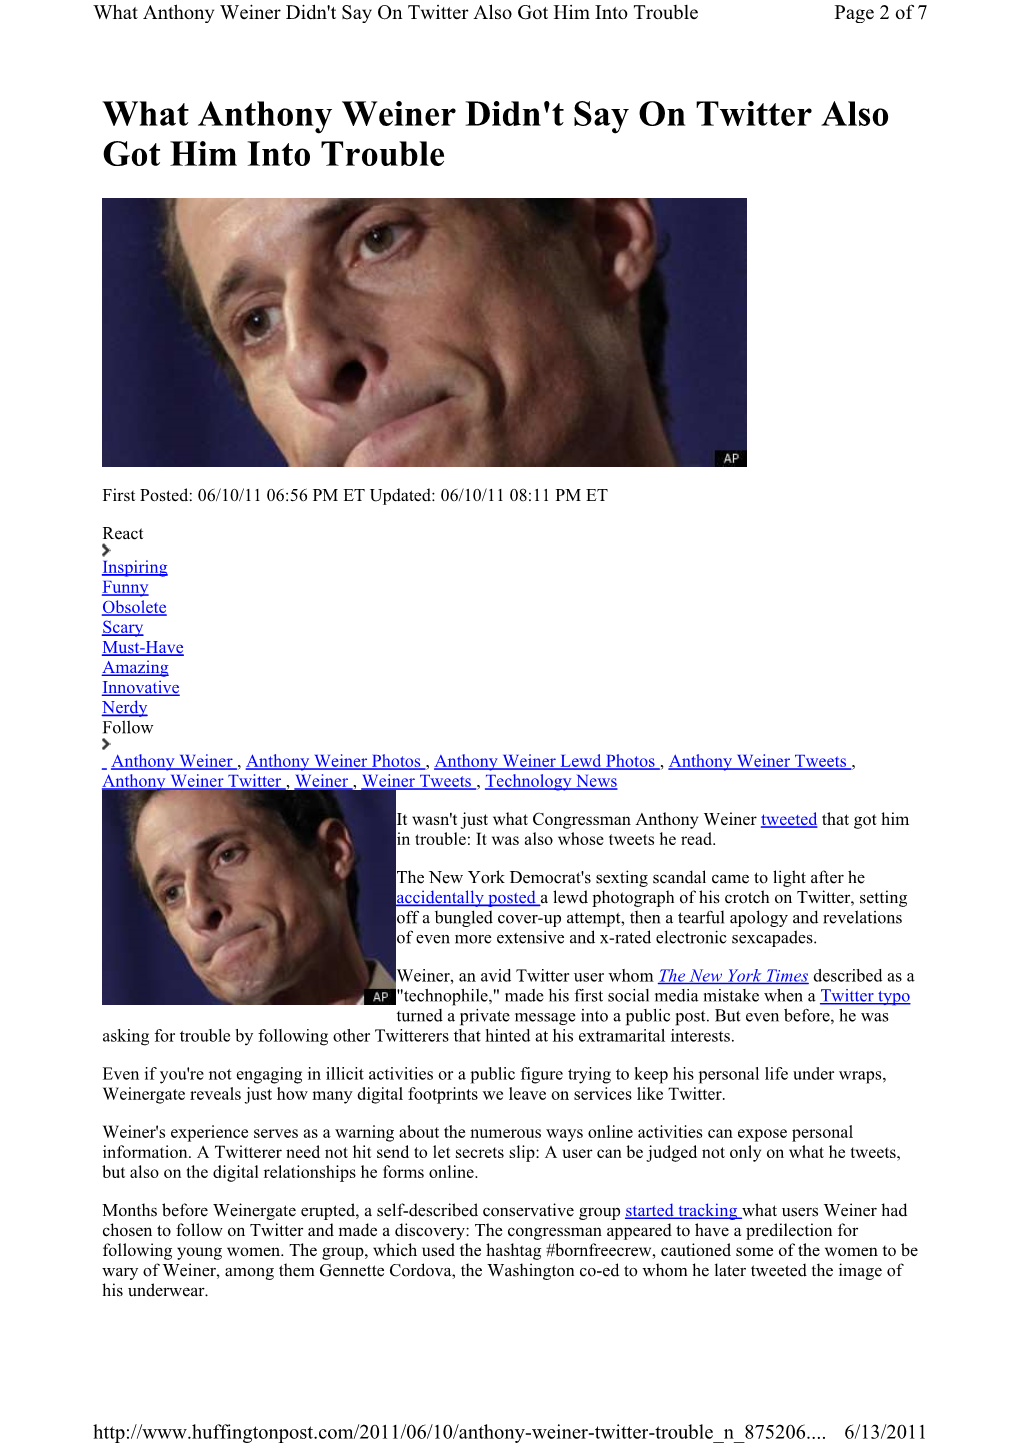 What Anthony Weiner Didn't Say on Twitter Also Got Him Into Trouble Page 2 of 7